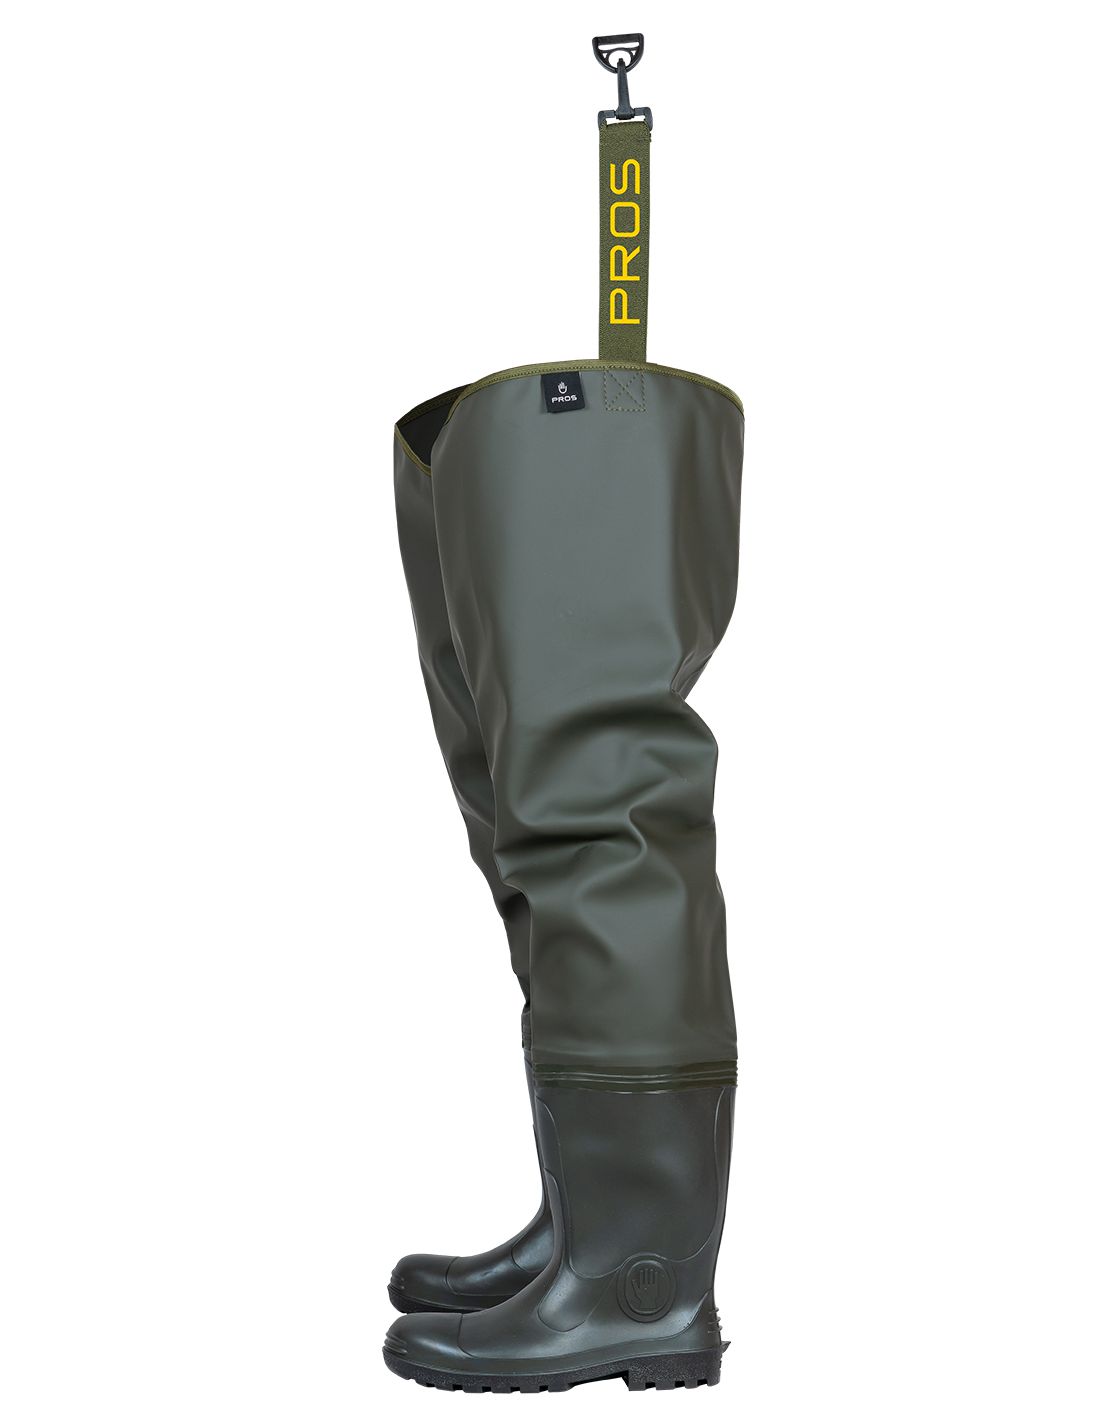 Thigh Waders - PROS